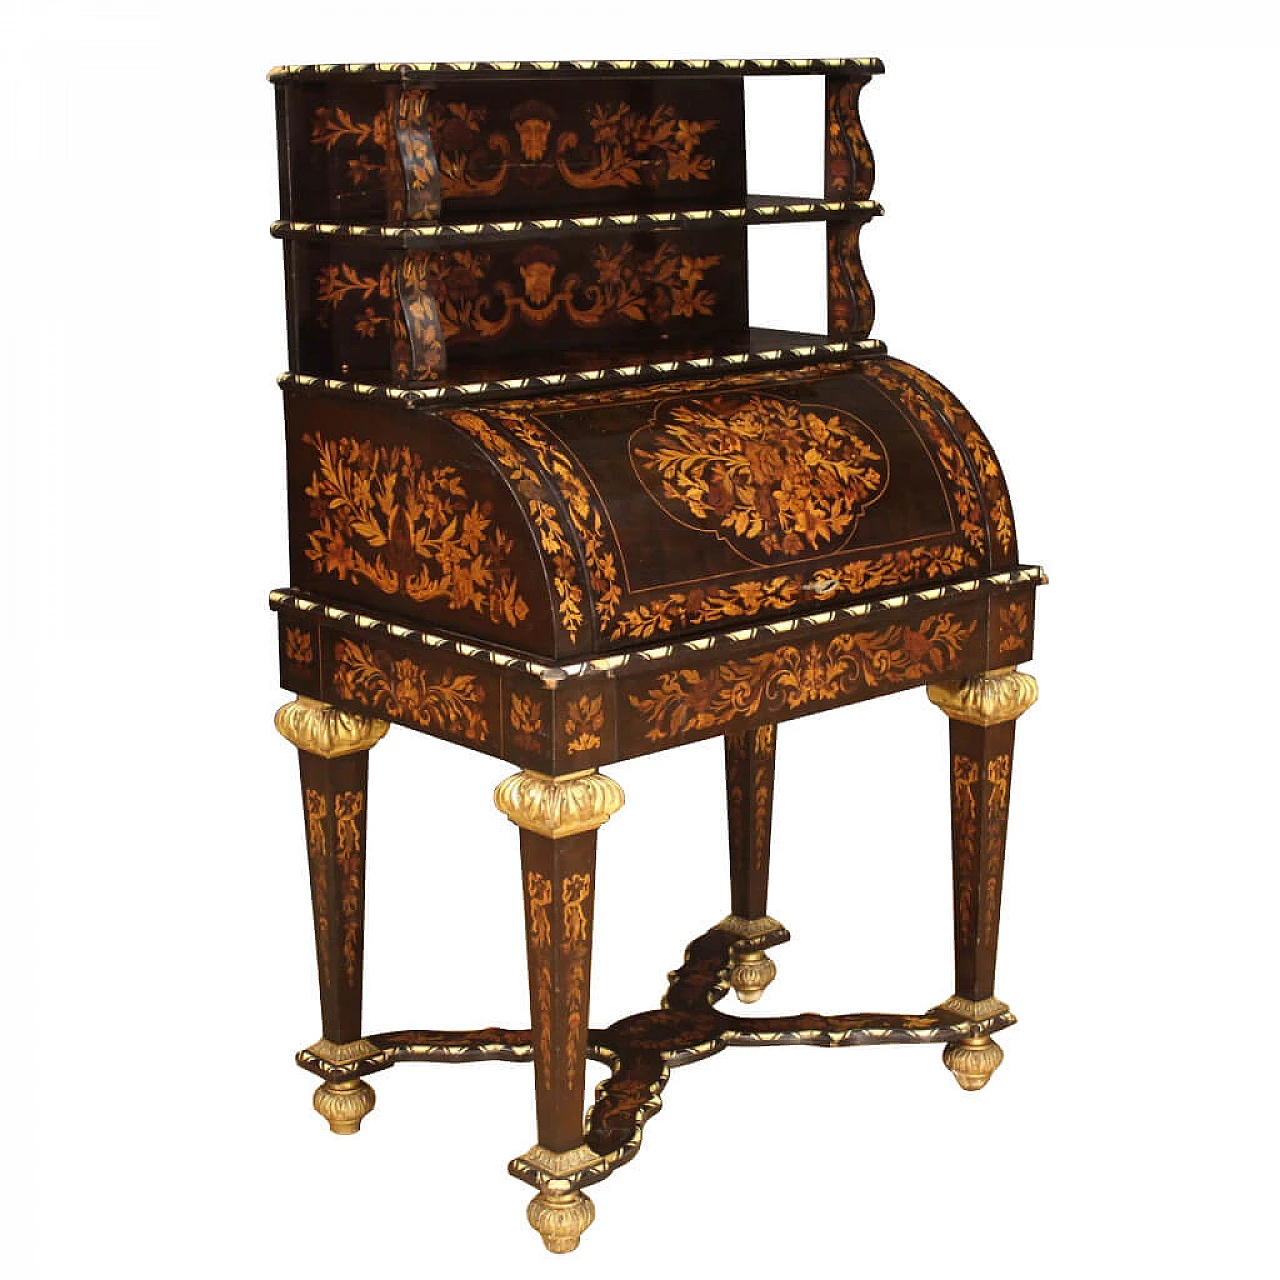 Inlaid French writing desk in Napoleon III style, early 20th century 1304454